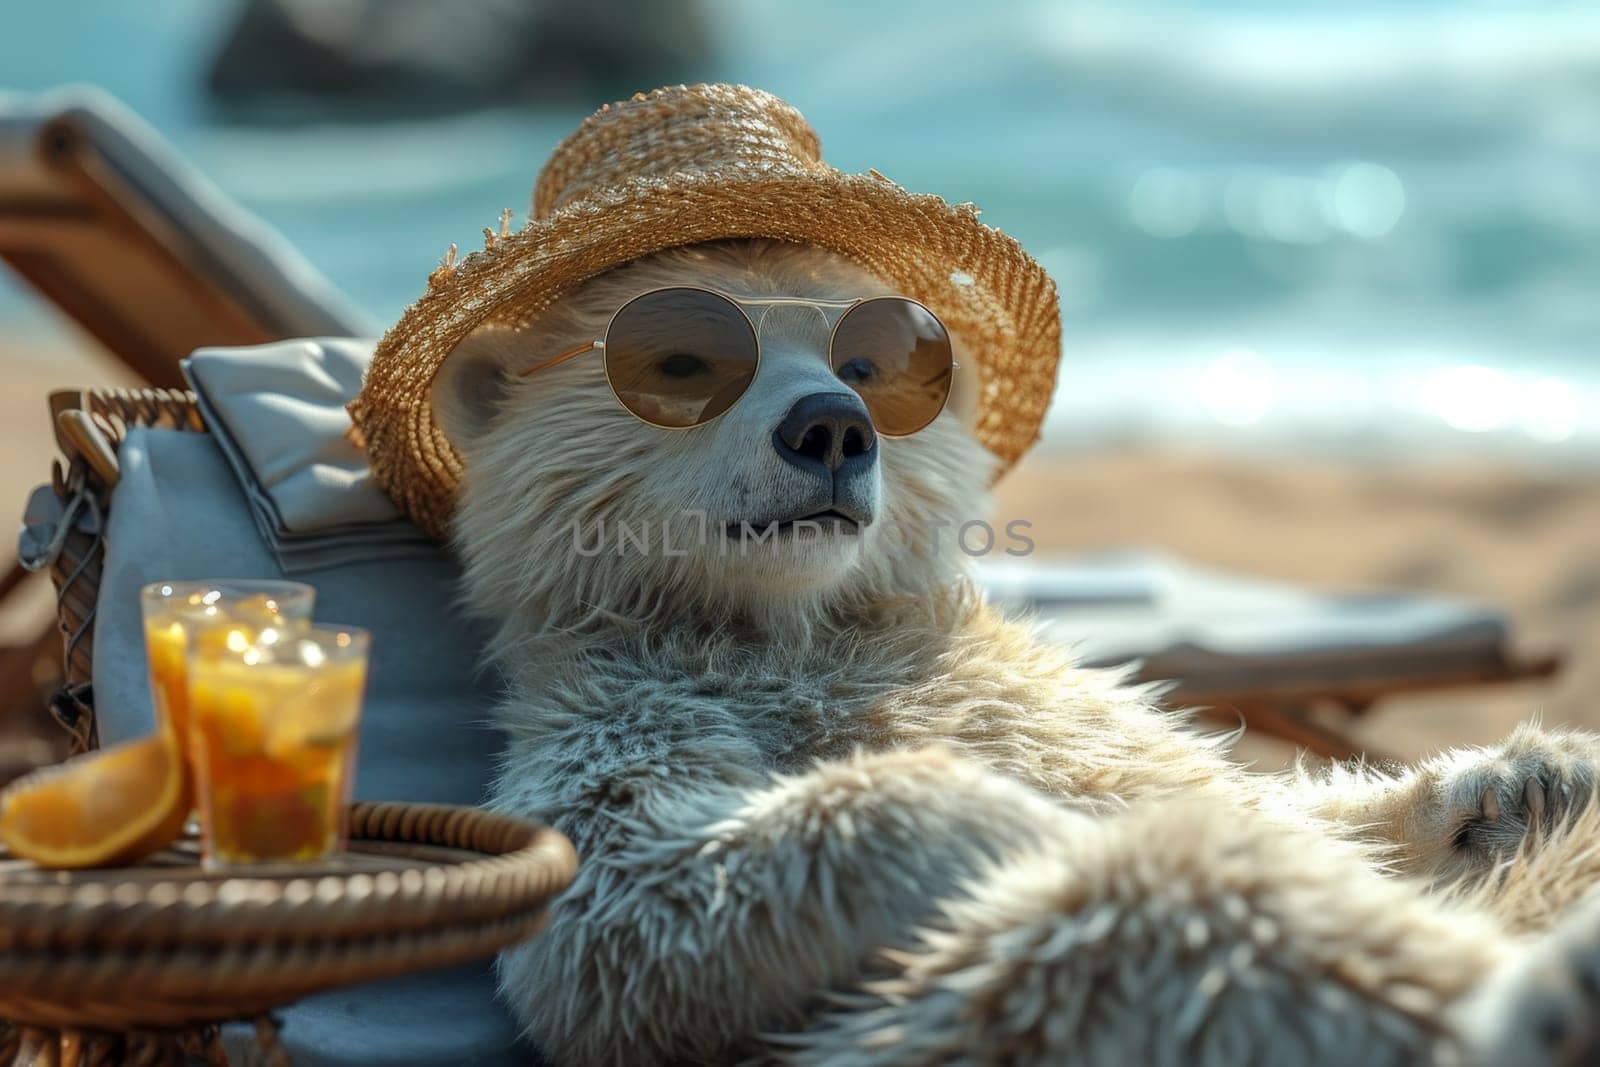 A polar bear in a hat and glasses is relaxing on the beach in a chaise longue drinking orange juice. 3d illustration by Lobachad